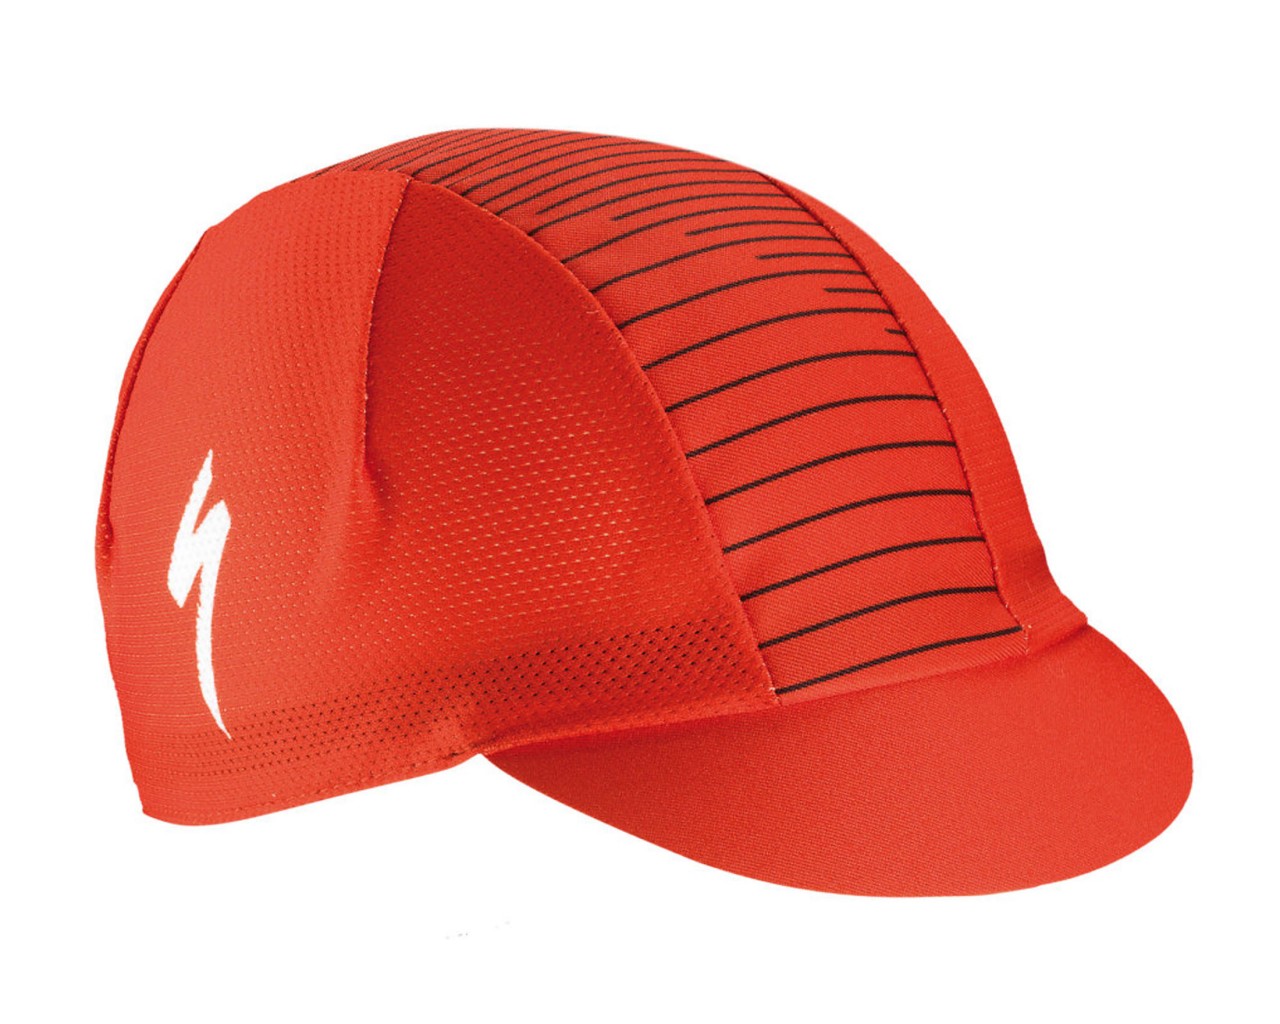 Specialized Cycling Cap Light Terrain | rocket red-black